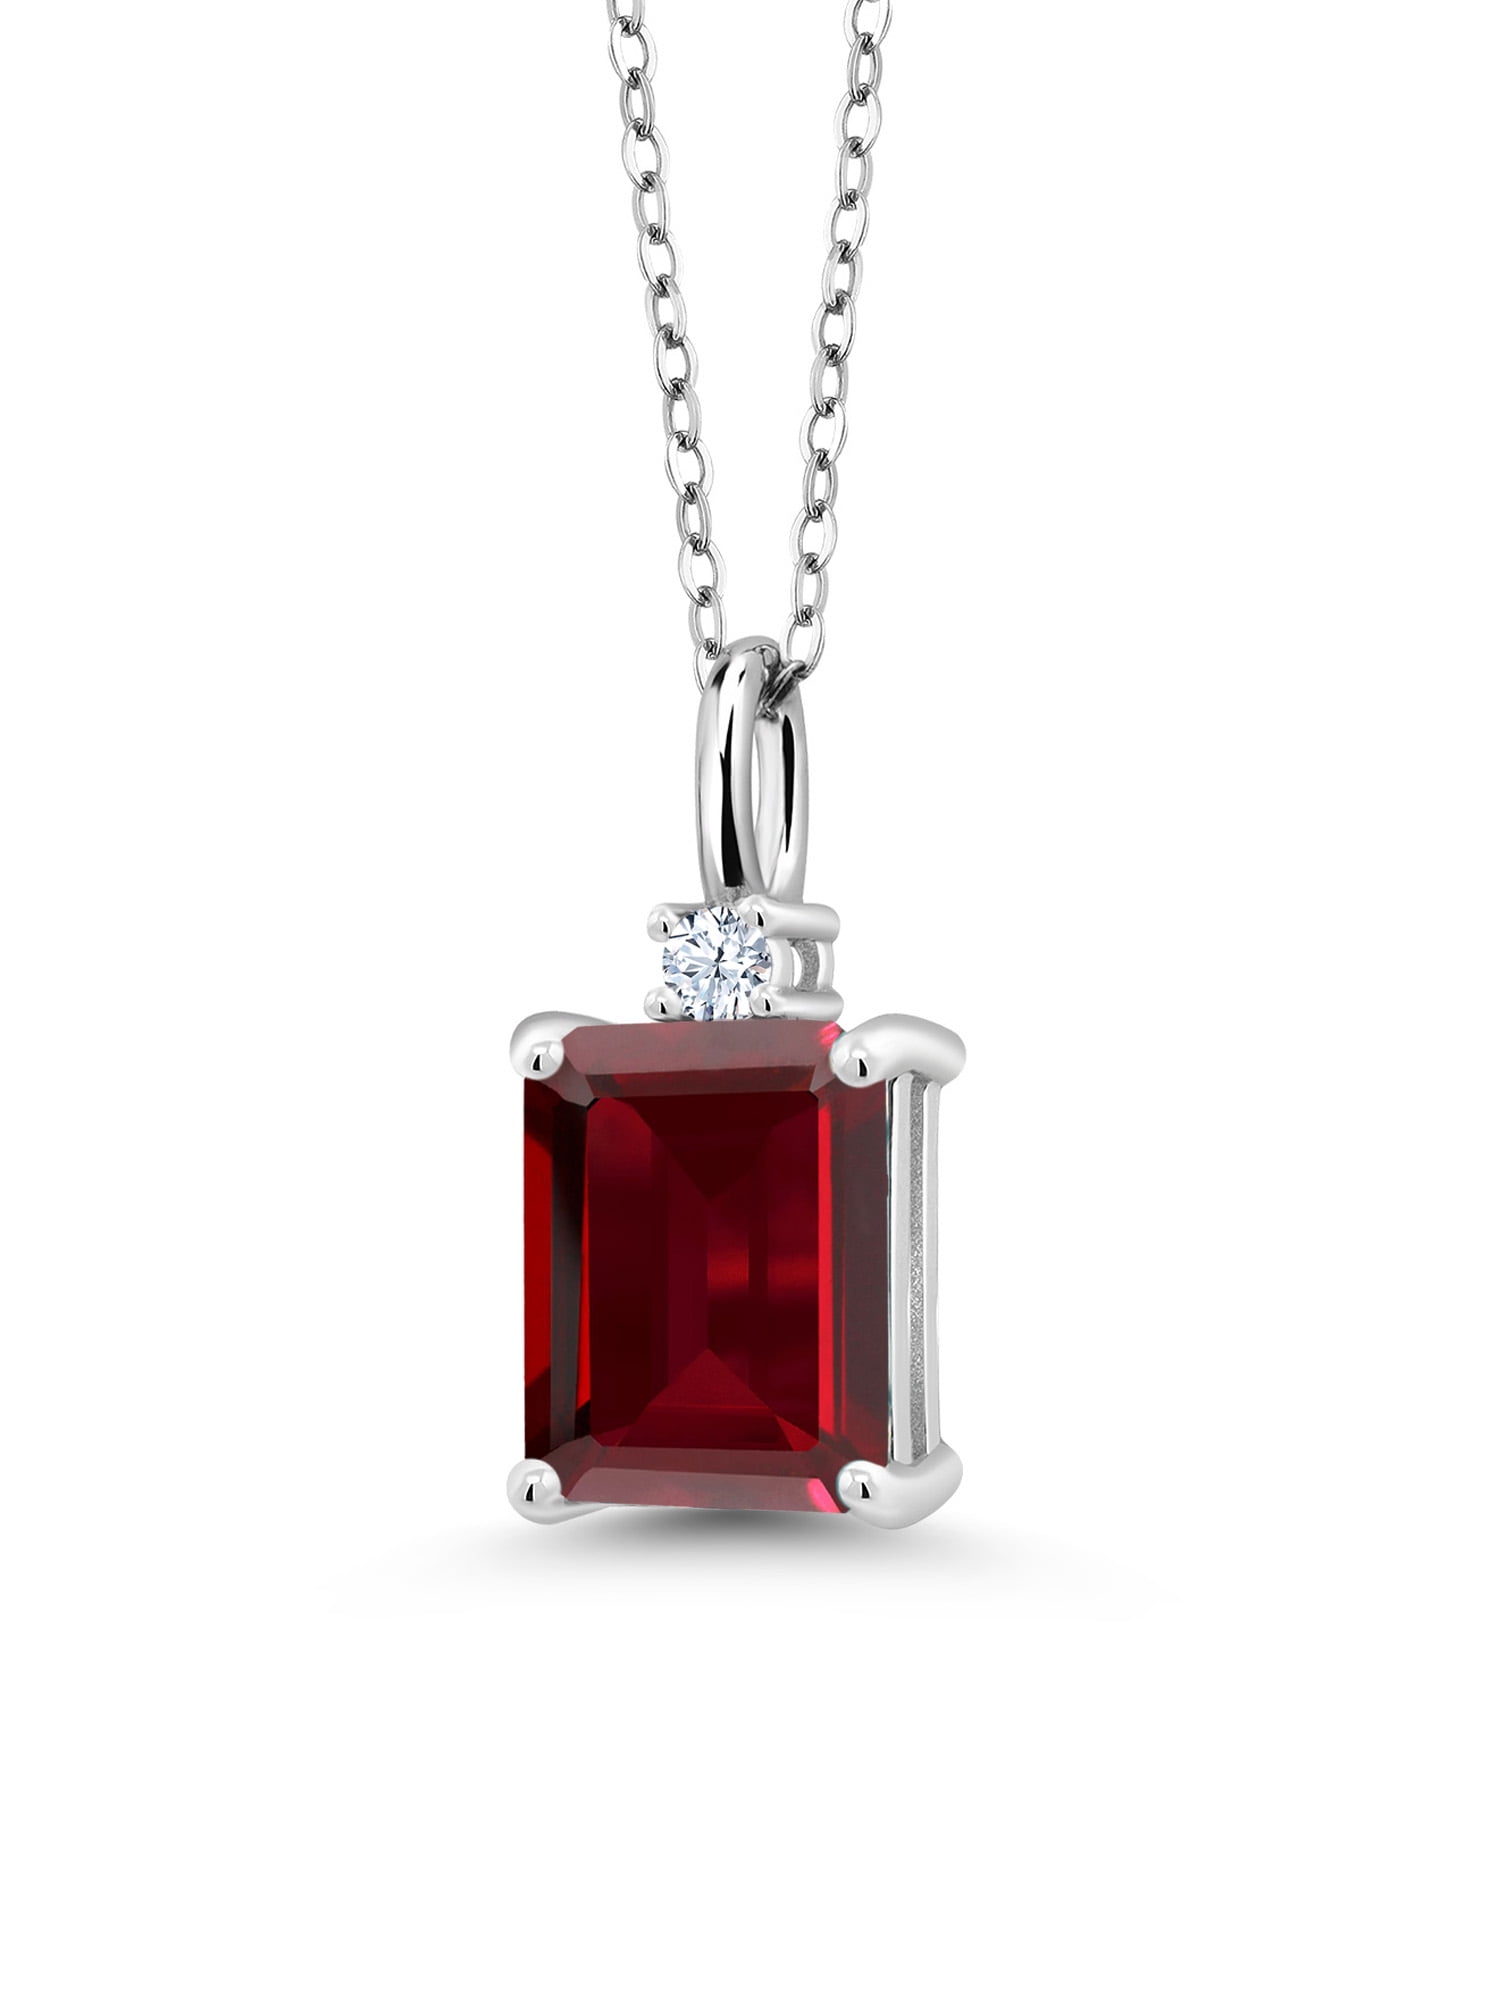 Classic Elegant Red Round Engraved Stone Pendant Necklace Jewelry  Accessories Gifts For Men Women